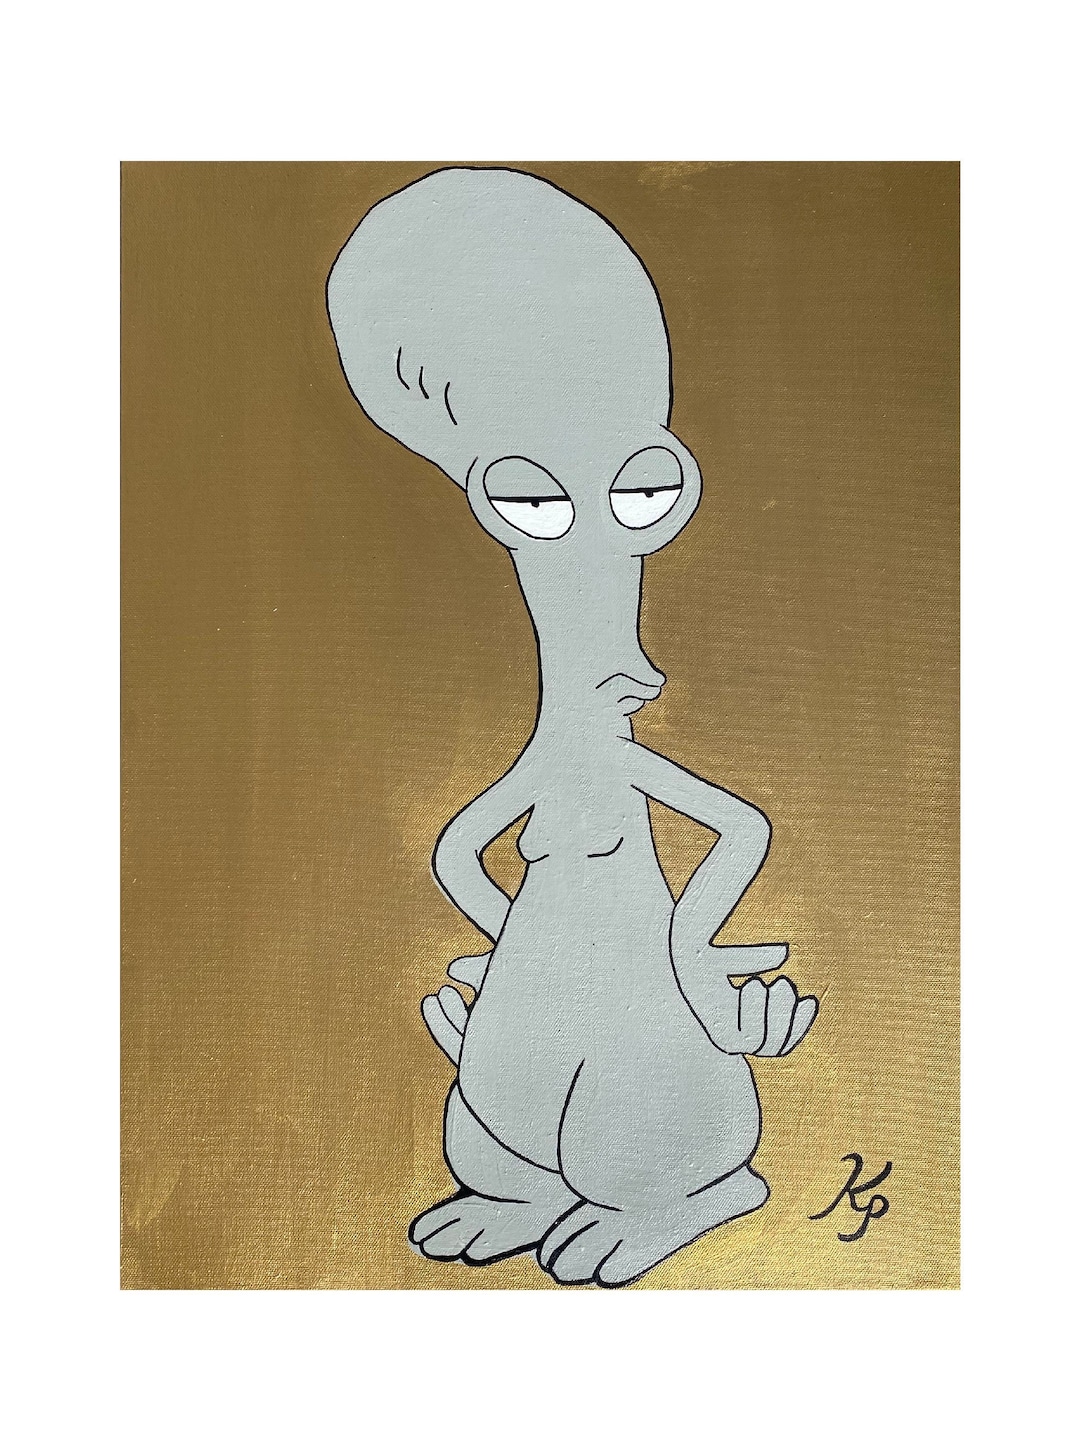 carrie hass recommends images of roger from american dad pic